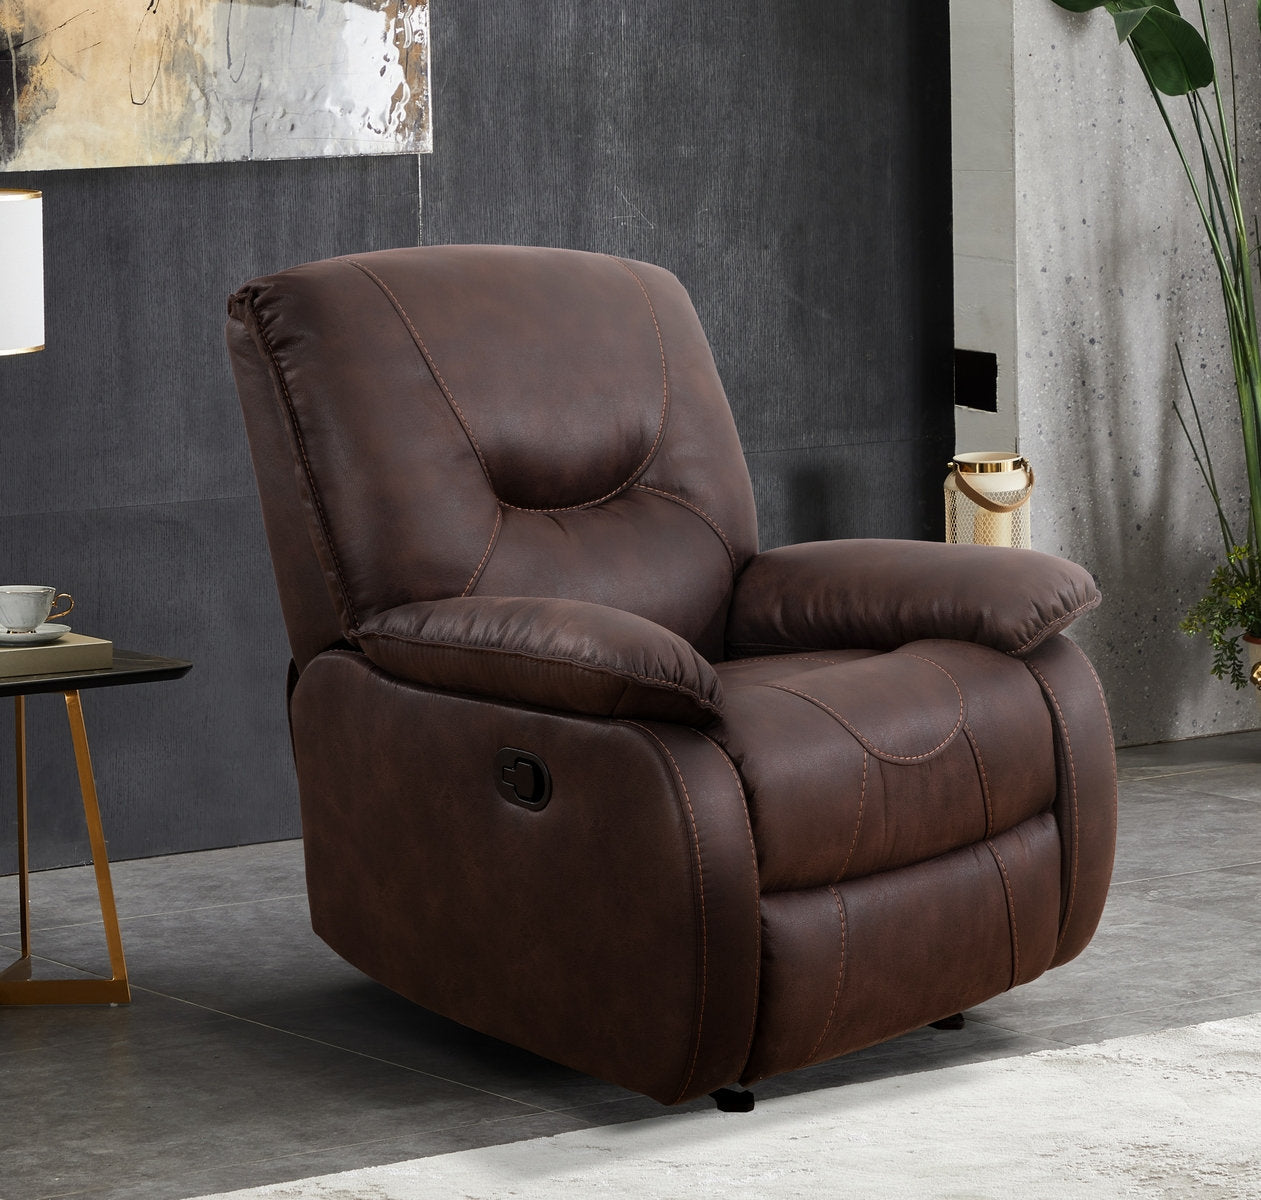 Brown Elephant Skin Fabric Recliner Chair with Solid Hardwood Frame